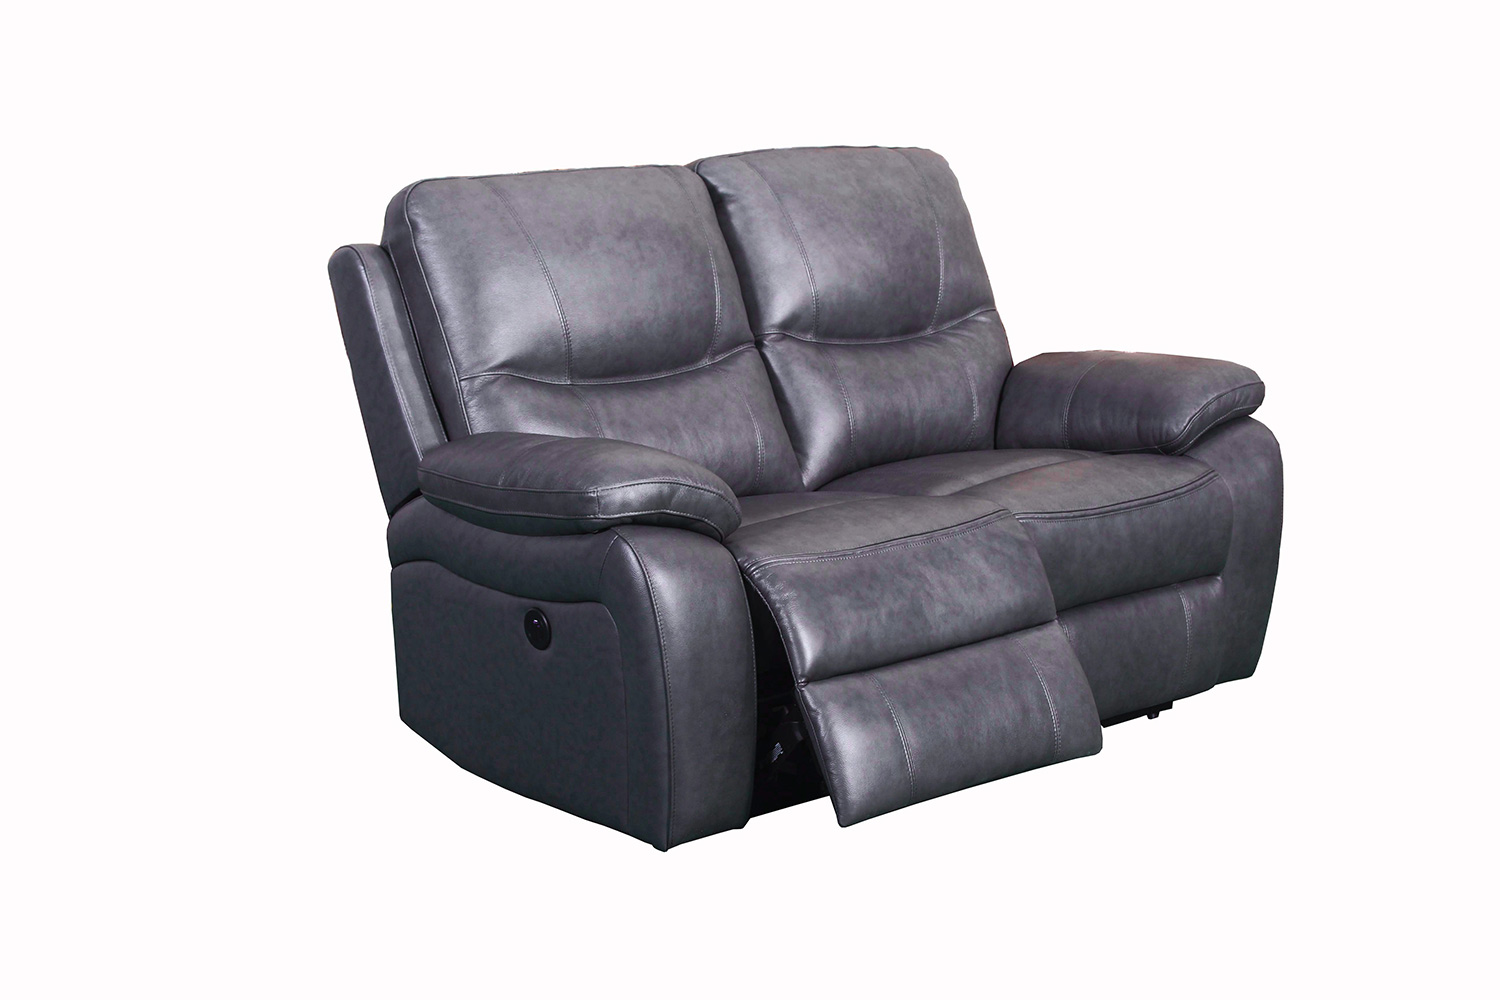 Barcalounger Carter Power Reclining Loveseat - Toby Gray/Leather Match